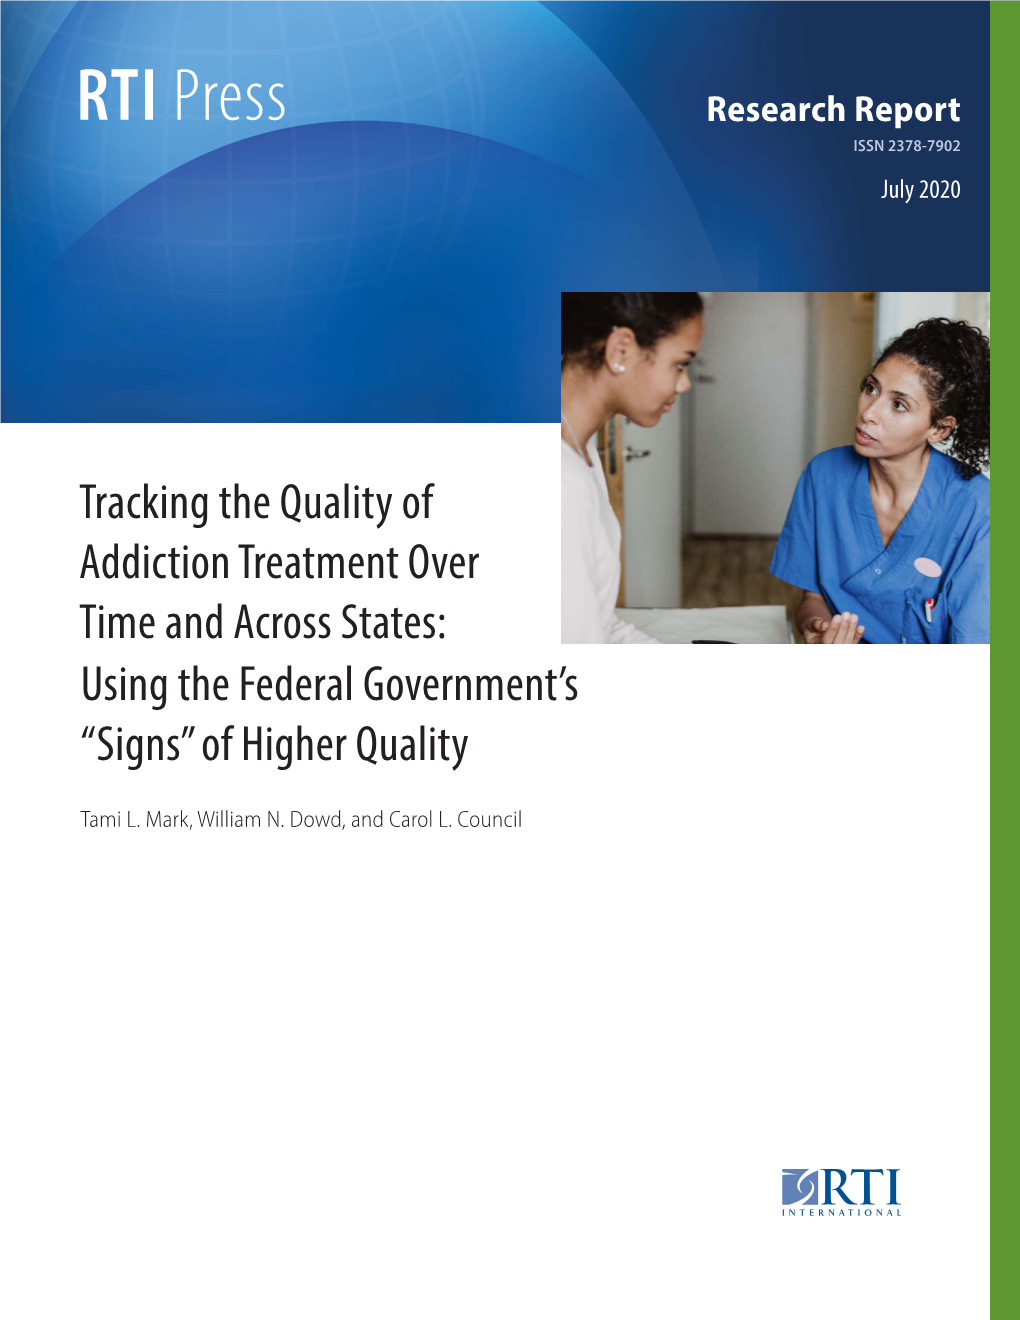 Tracking the Quality of Addiction Treatment Over Time and Across States: Using the Federal Government’S “Signs” of Higher Quality